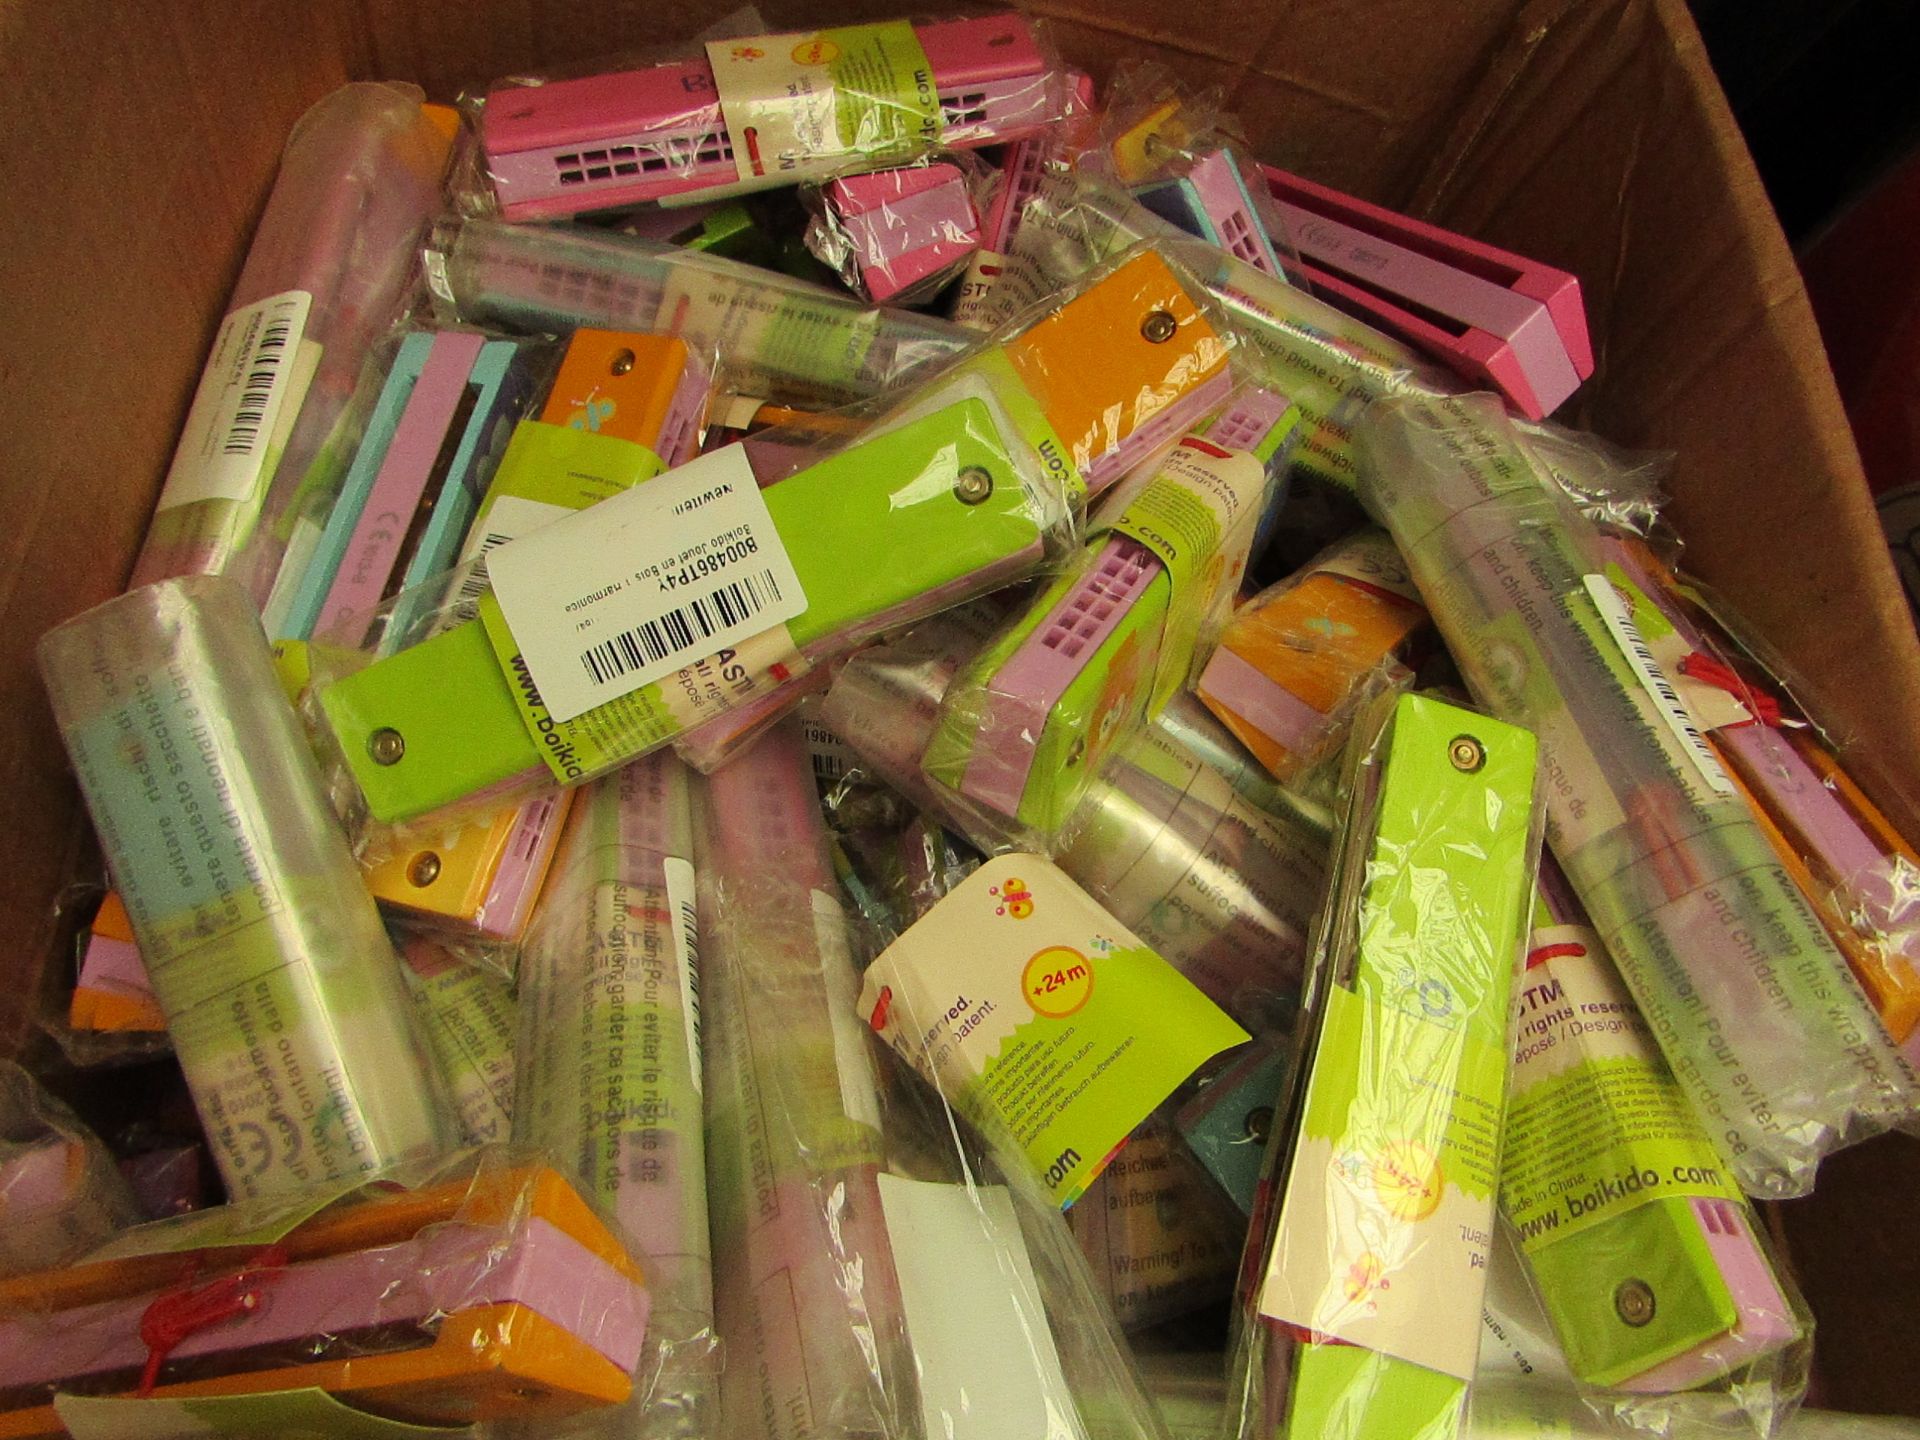 20 x Kids Harmonicas. New & Packaged